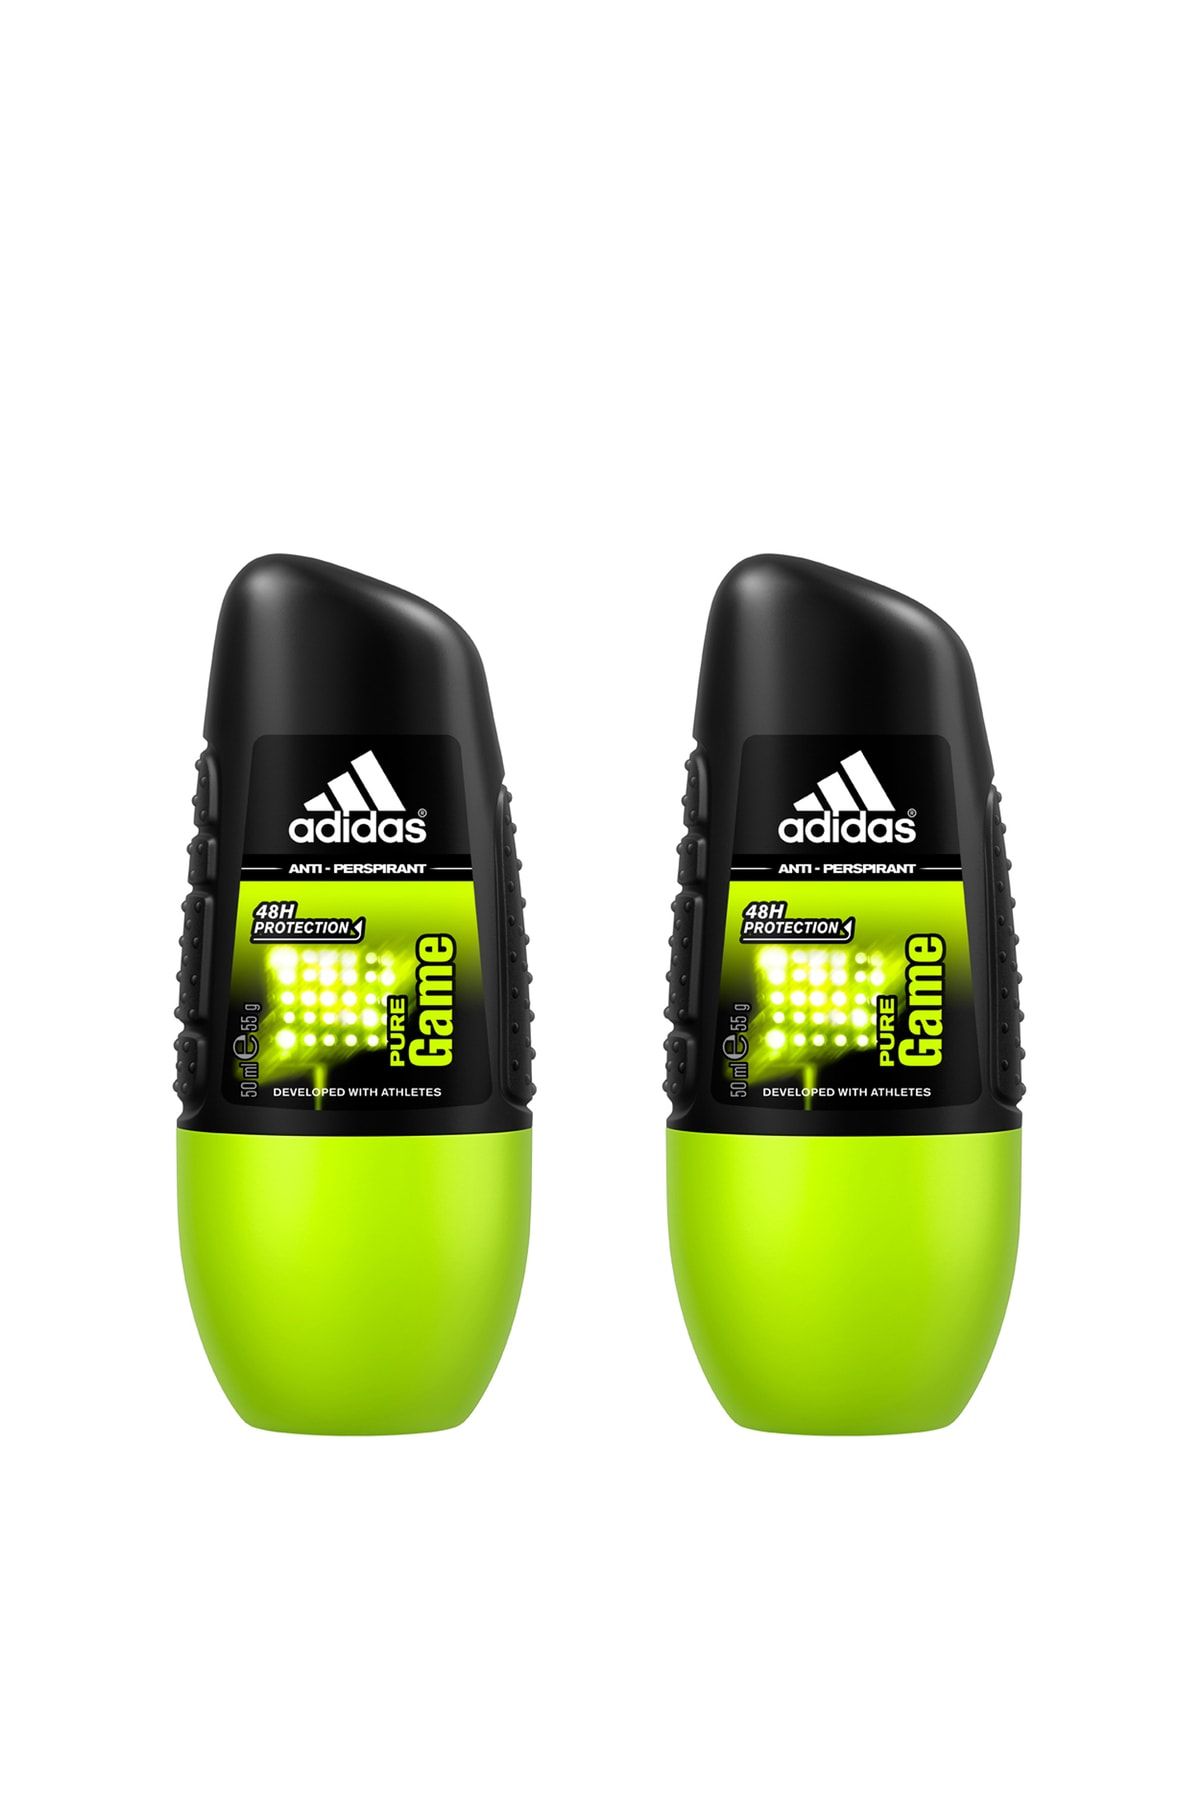 adidas For Men Rollon Pure Game 50 Ml X 2 Adet